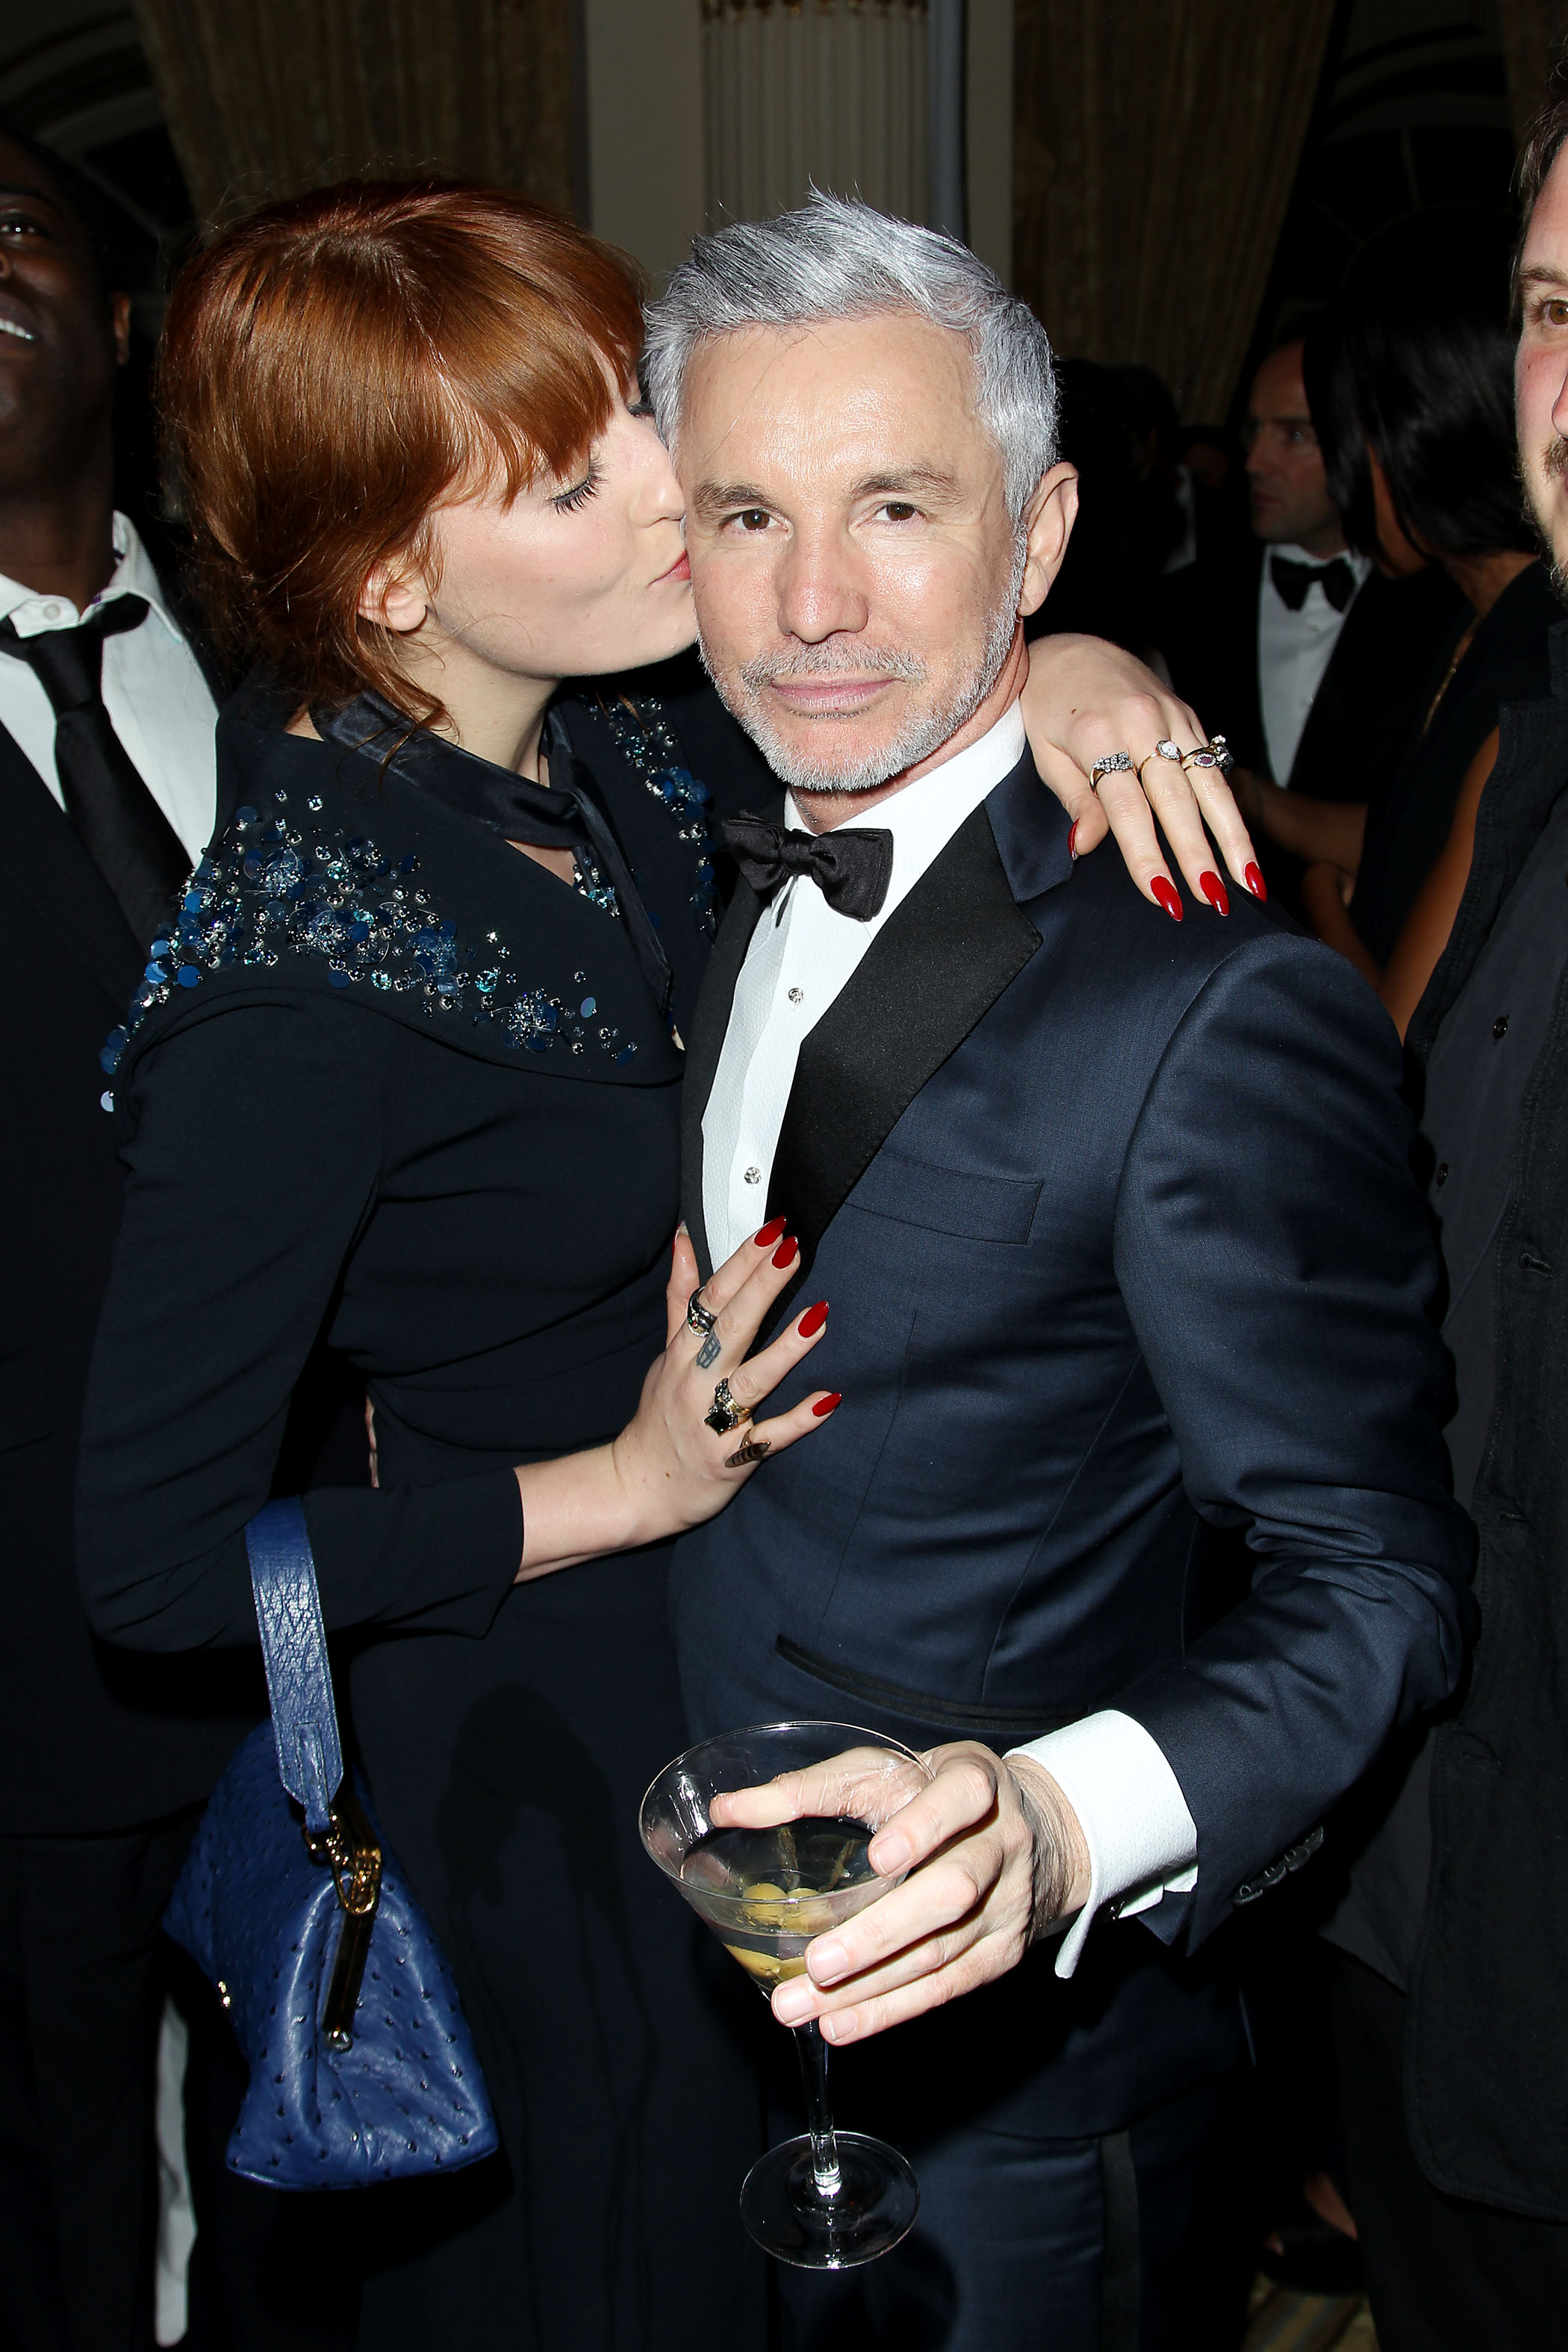 Moet & Chandon Celebrates "The Great Gatsby" Afterparty - Florence Welch, Baz Luhrmann - photo by Dave Allocca/Startraksphoto.com